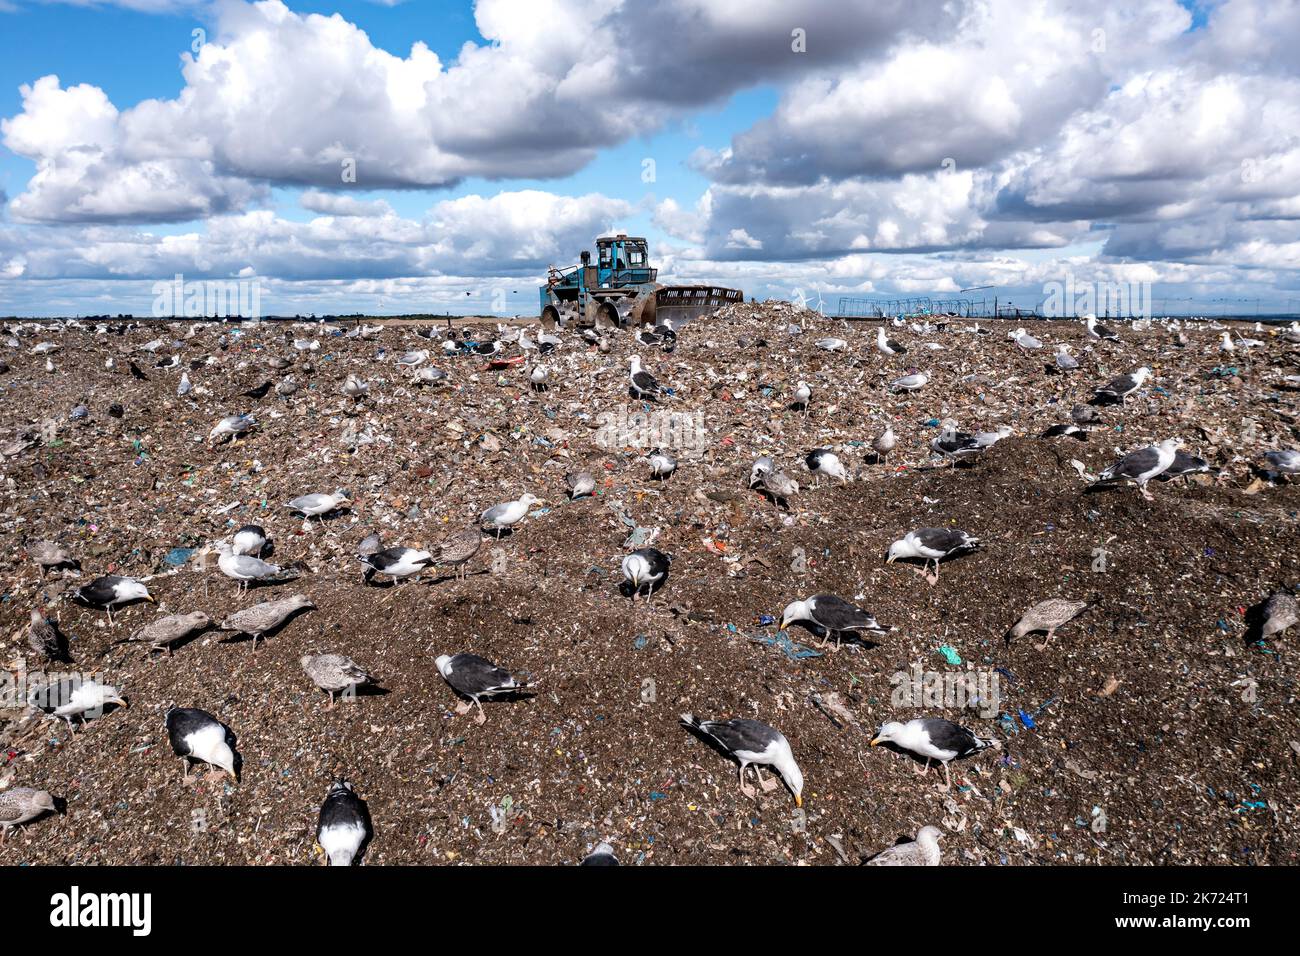 A Bulldozer machine moving waste and household garbage on a large landfill heap with birds scavenging for food Stock Photo